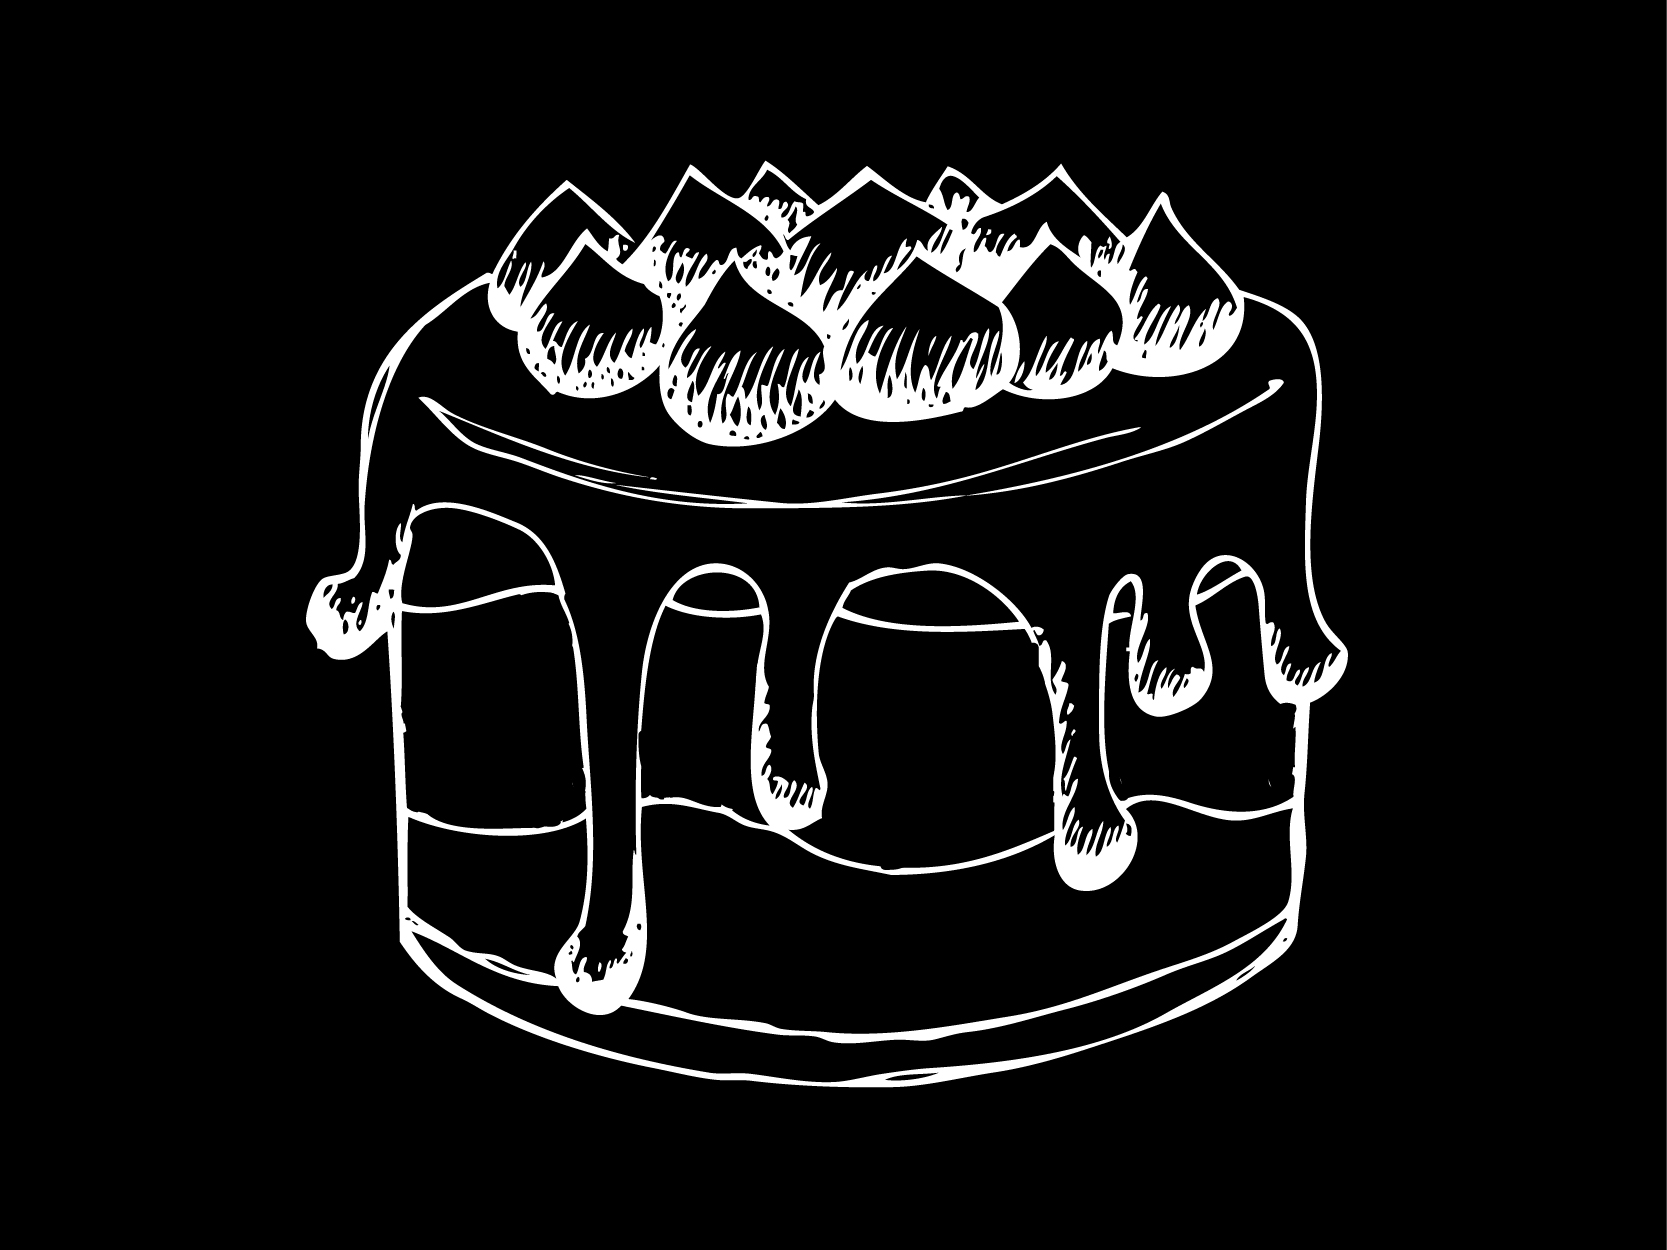 black and white chalk style drawing of a cake with 2 layers, dripping ganache, and topped with peaked merengue